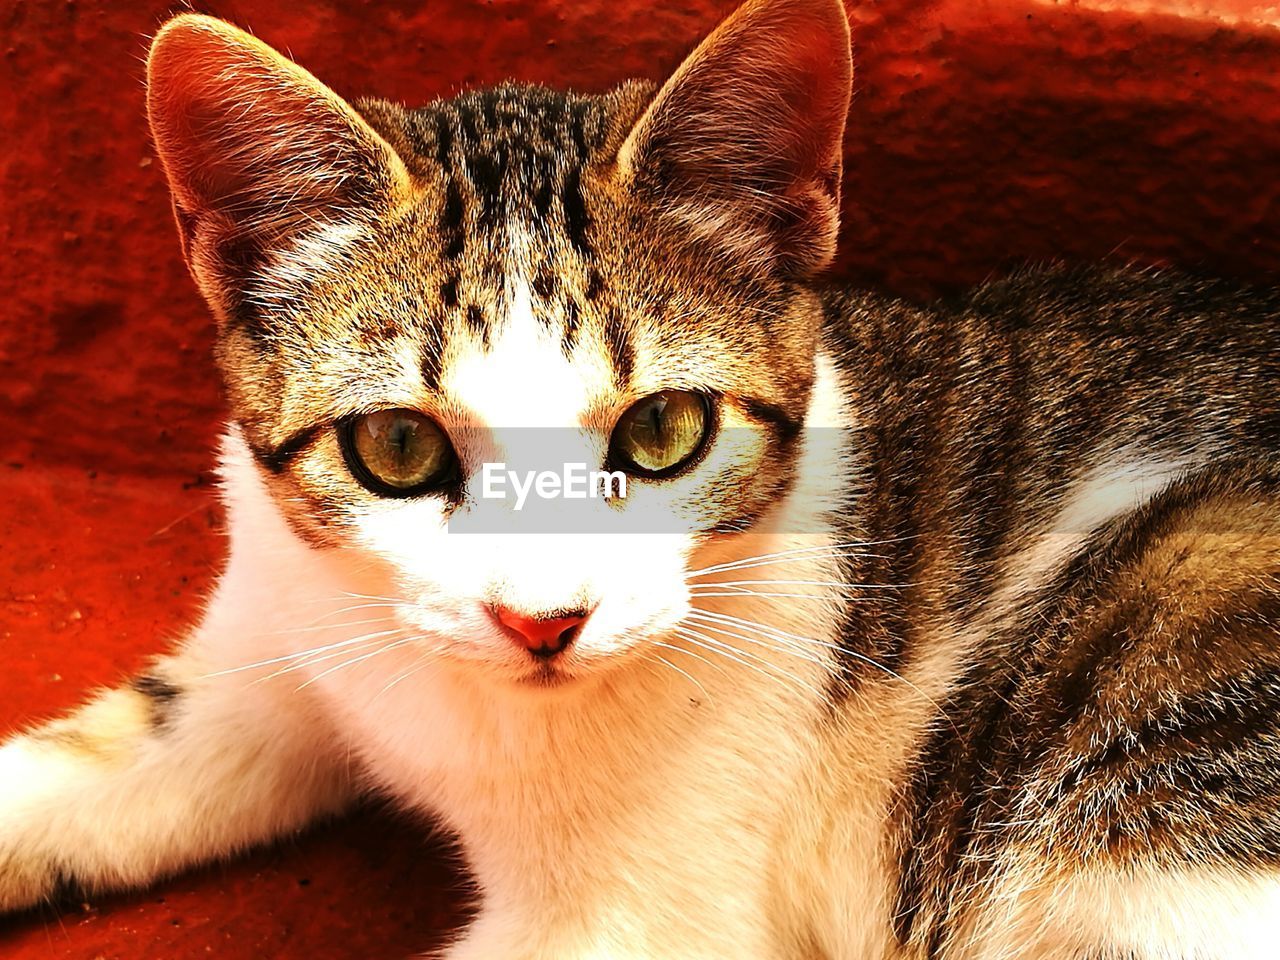 CLOSE-UP PORTRAIT OF TABBY CAT WITH ORANGE EYES